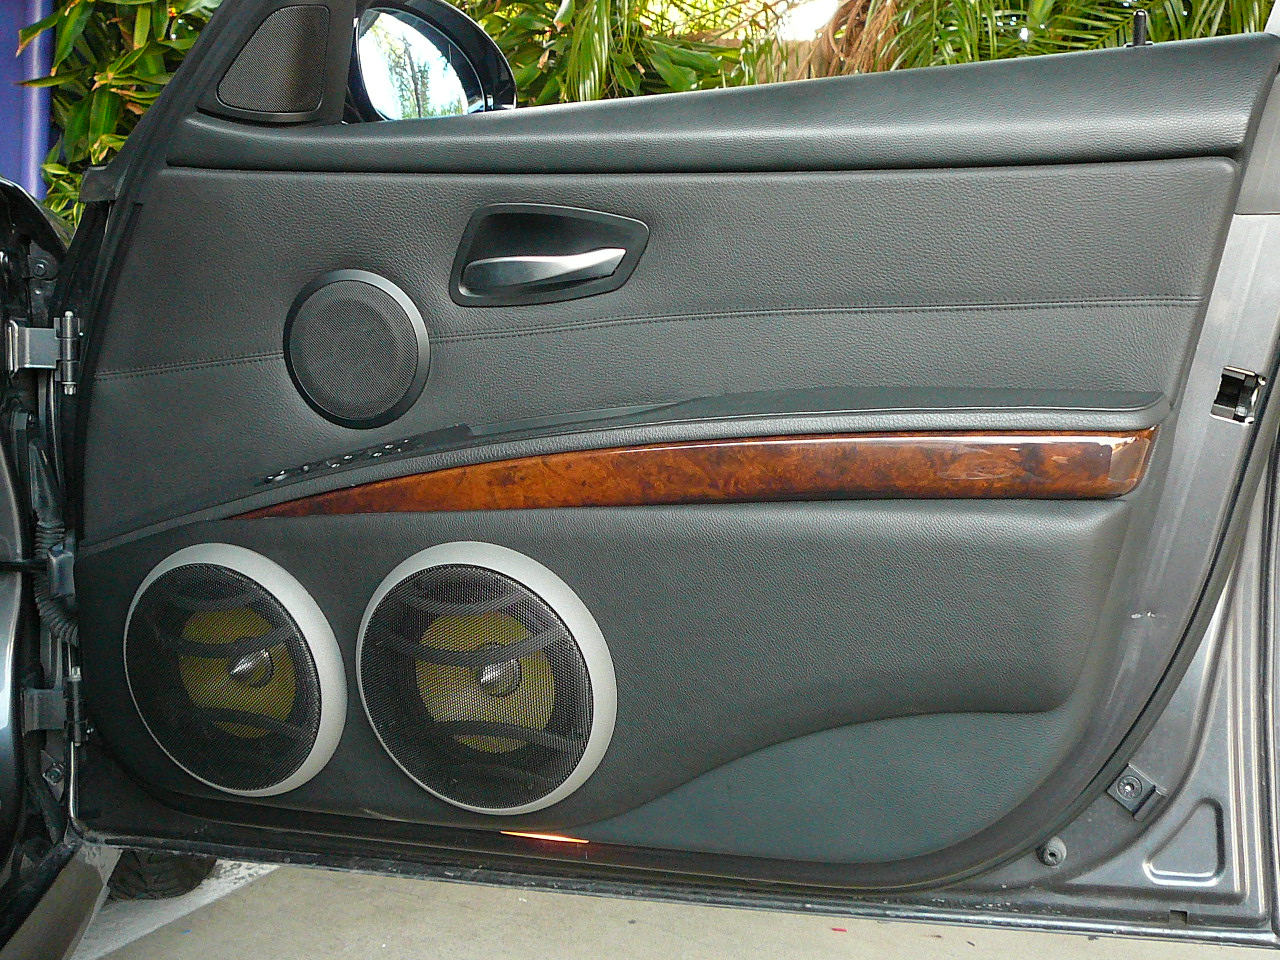 BMW 335i Focal & Audison Installation including Custom Door Pods, Subwoofer and Amplifier Boot Install